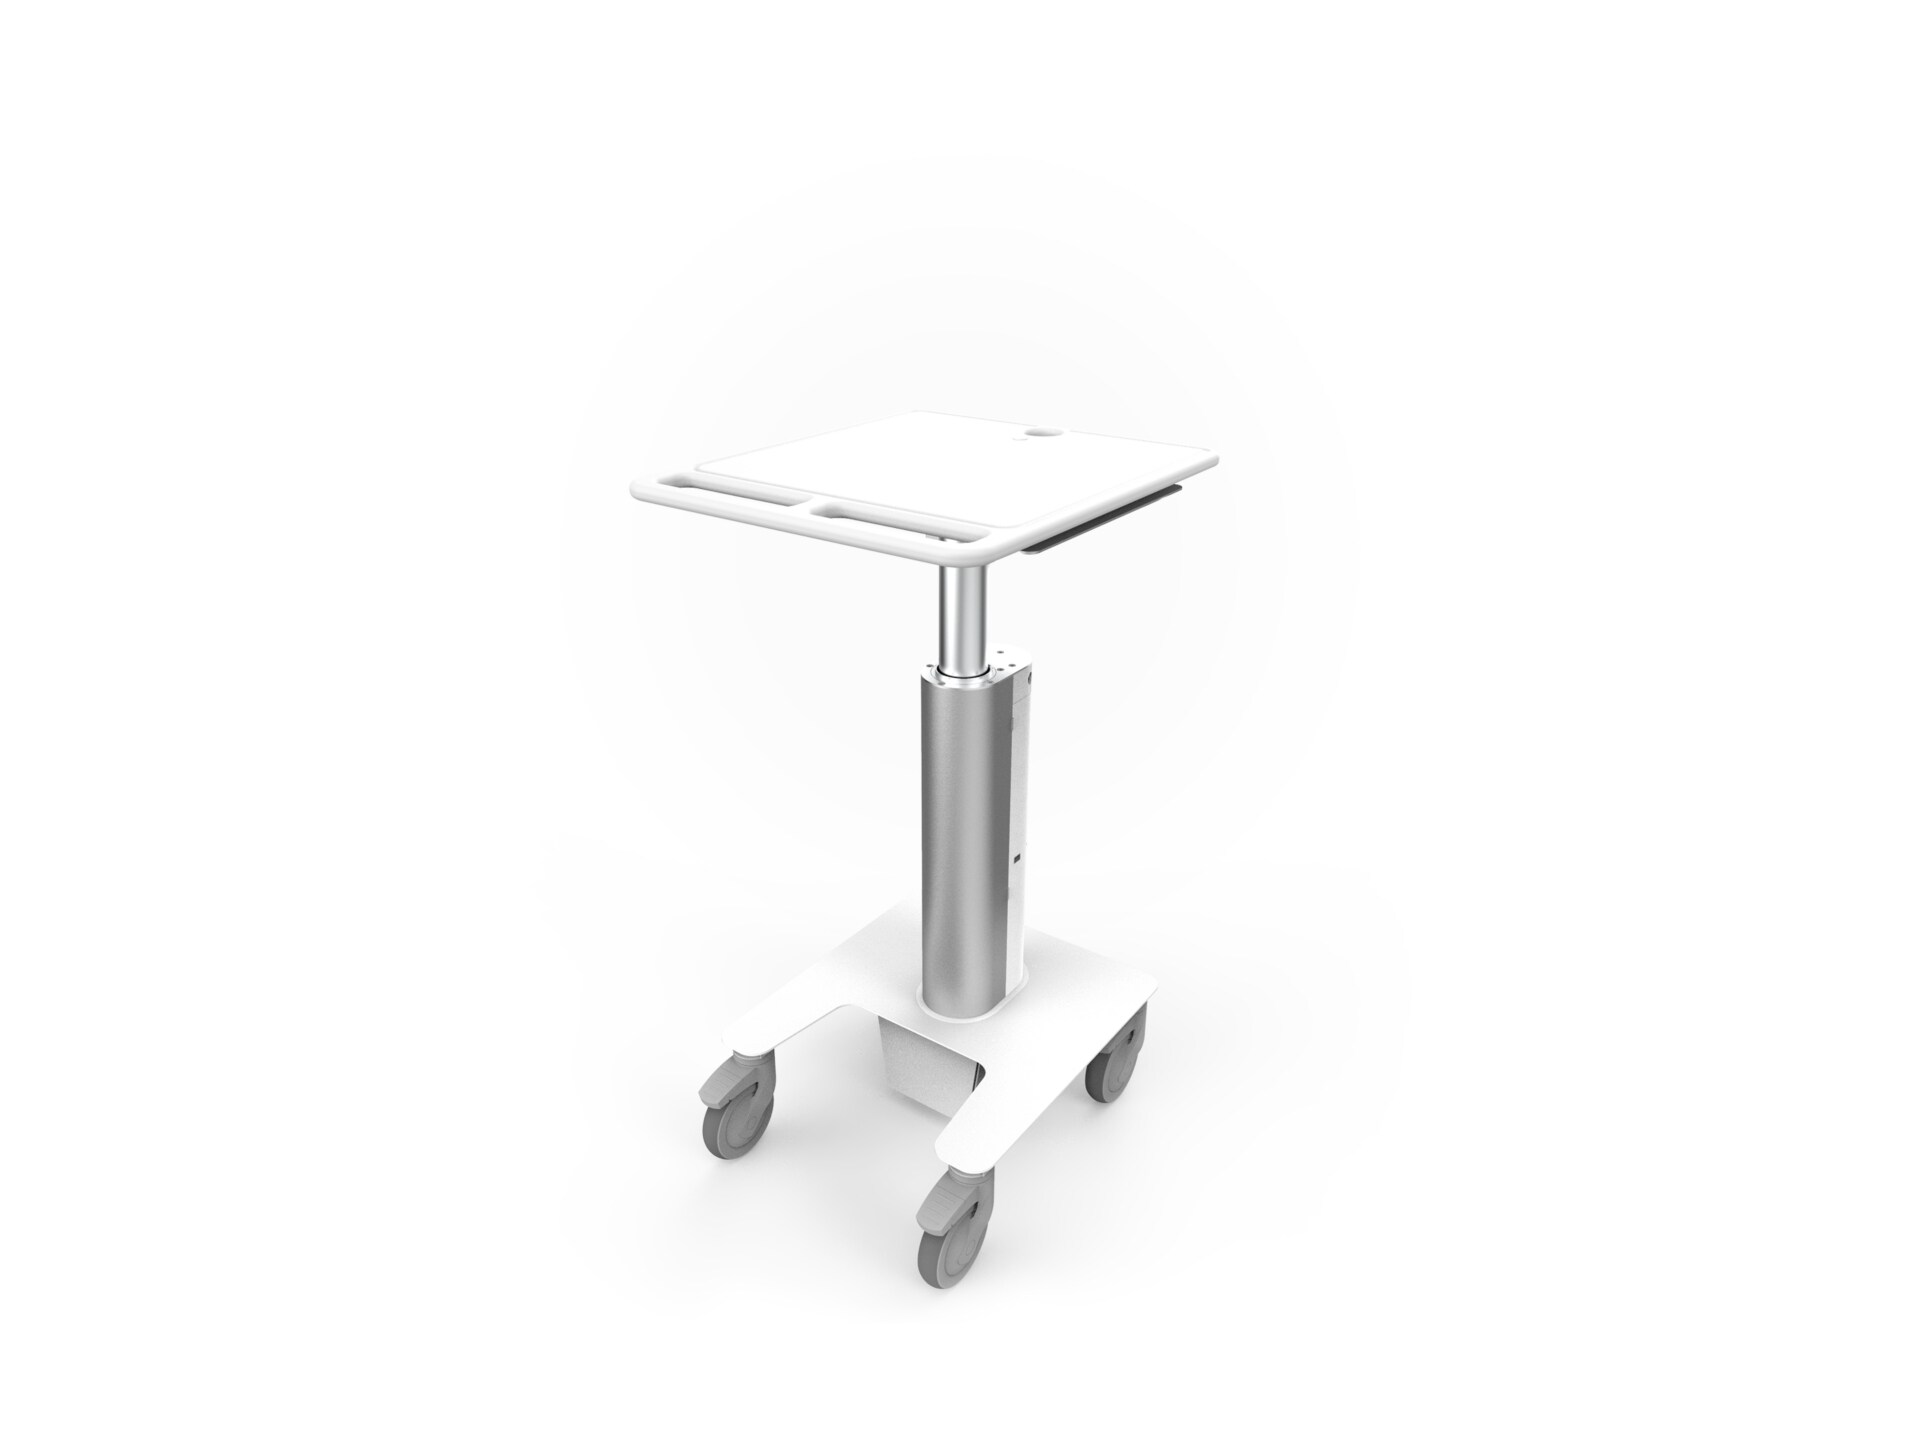 Capsa Healthcare T4 Cart - cart - for notebook - touchdown cart - white, silver